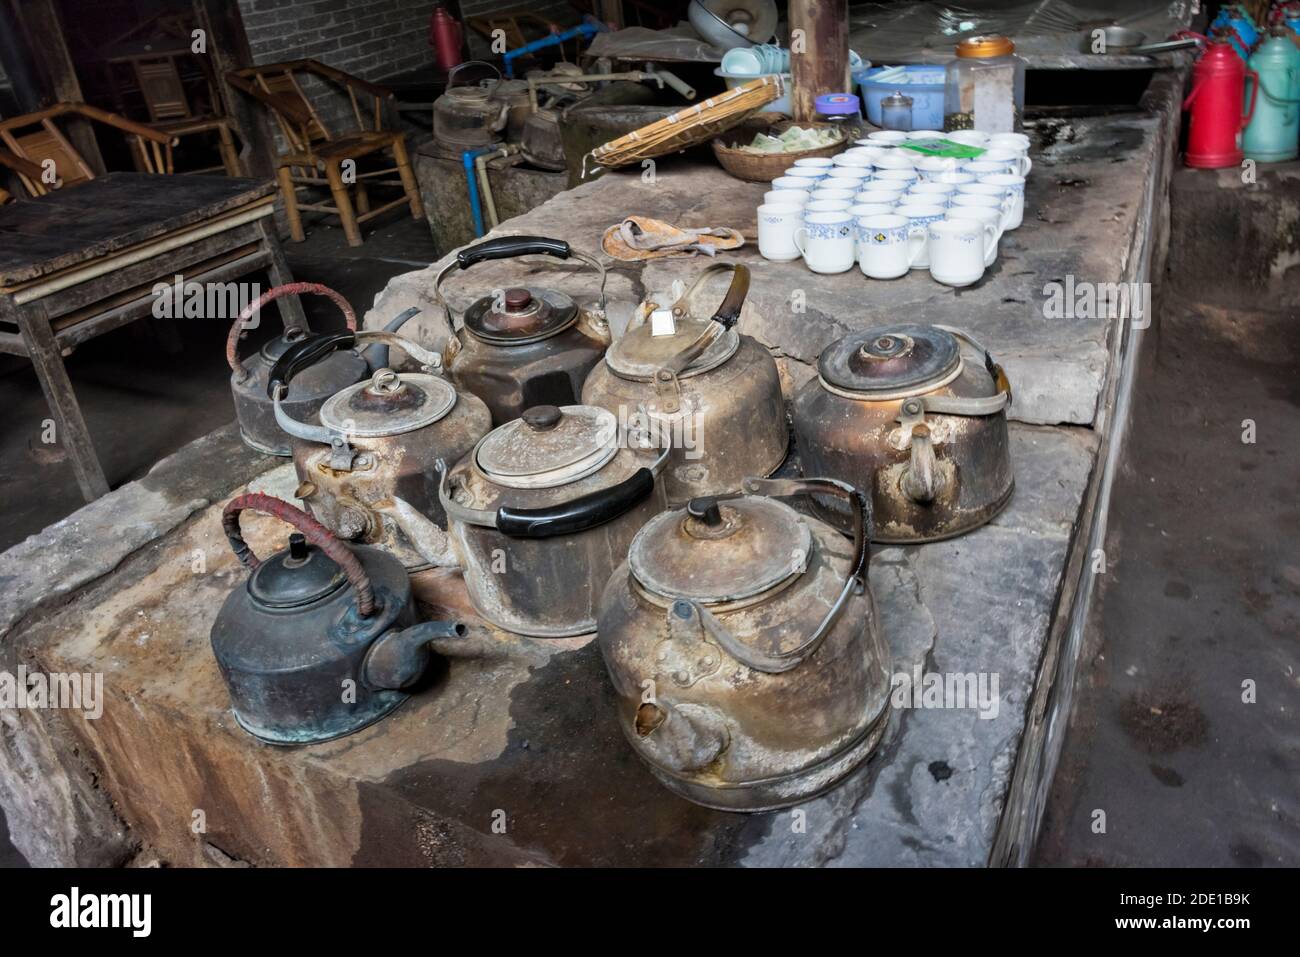 Tea kettles on the stove in an old tea house, Pengzhen, Chengdu, Sichuan Province, China Stock Photo